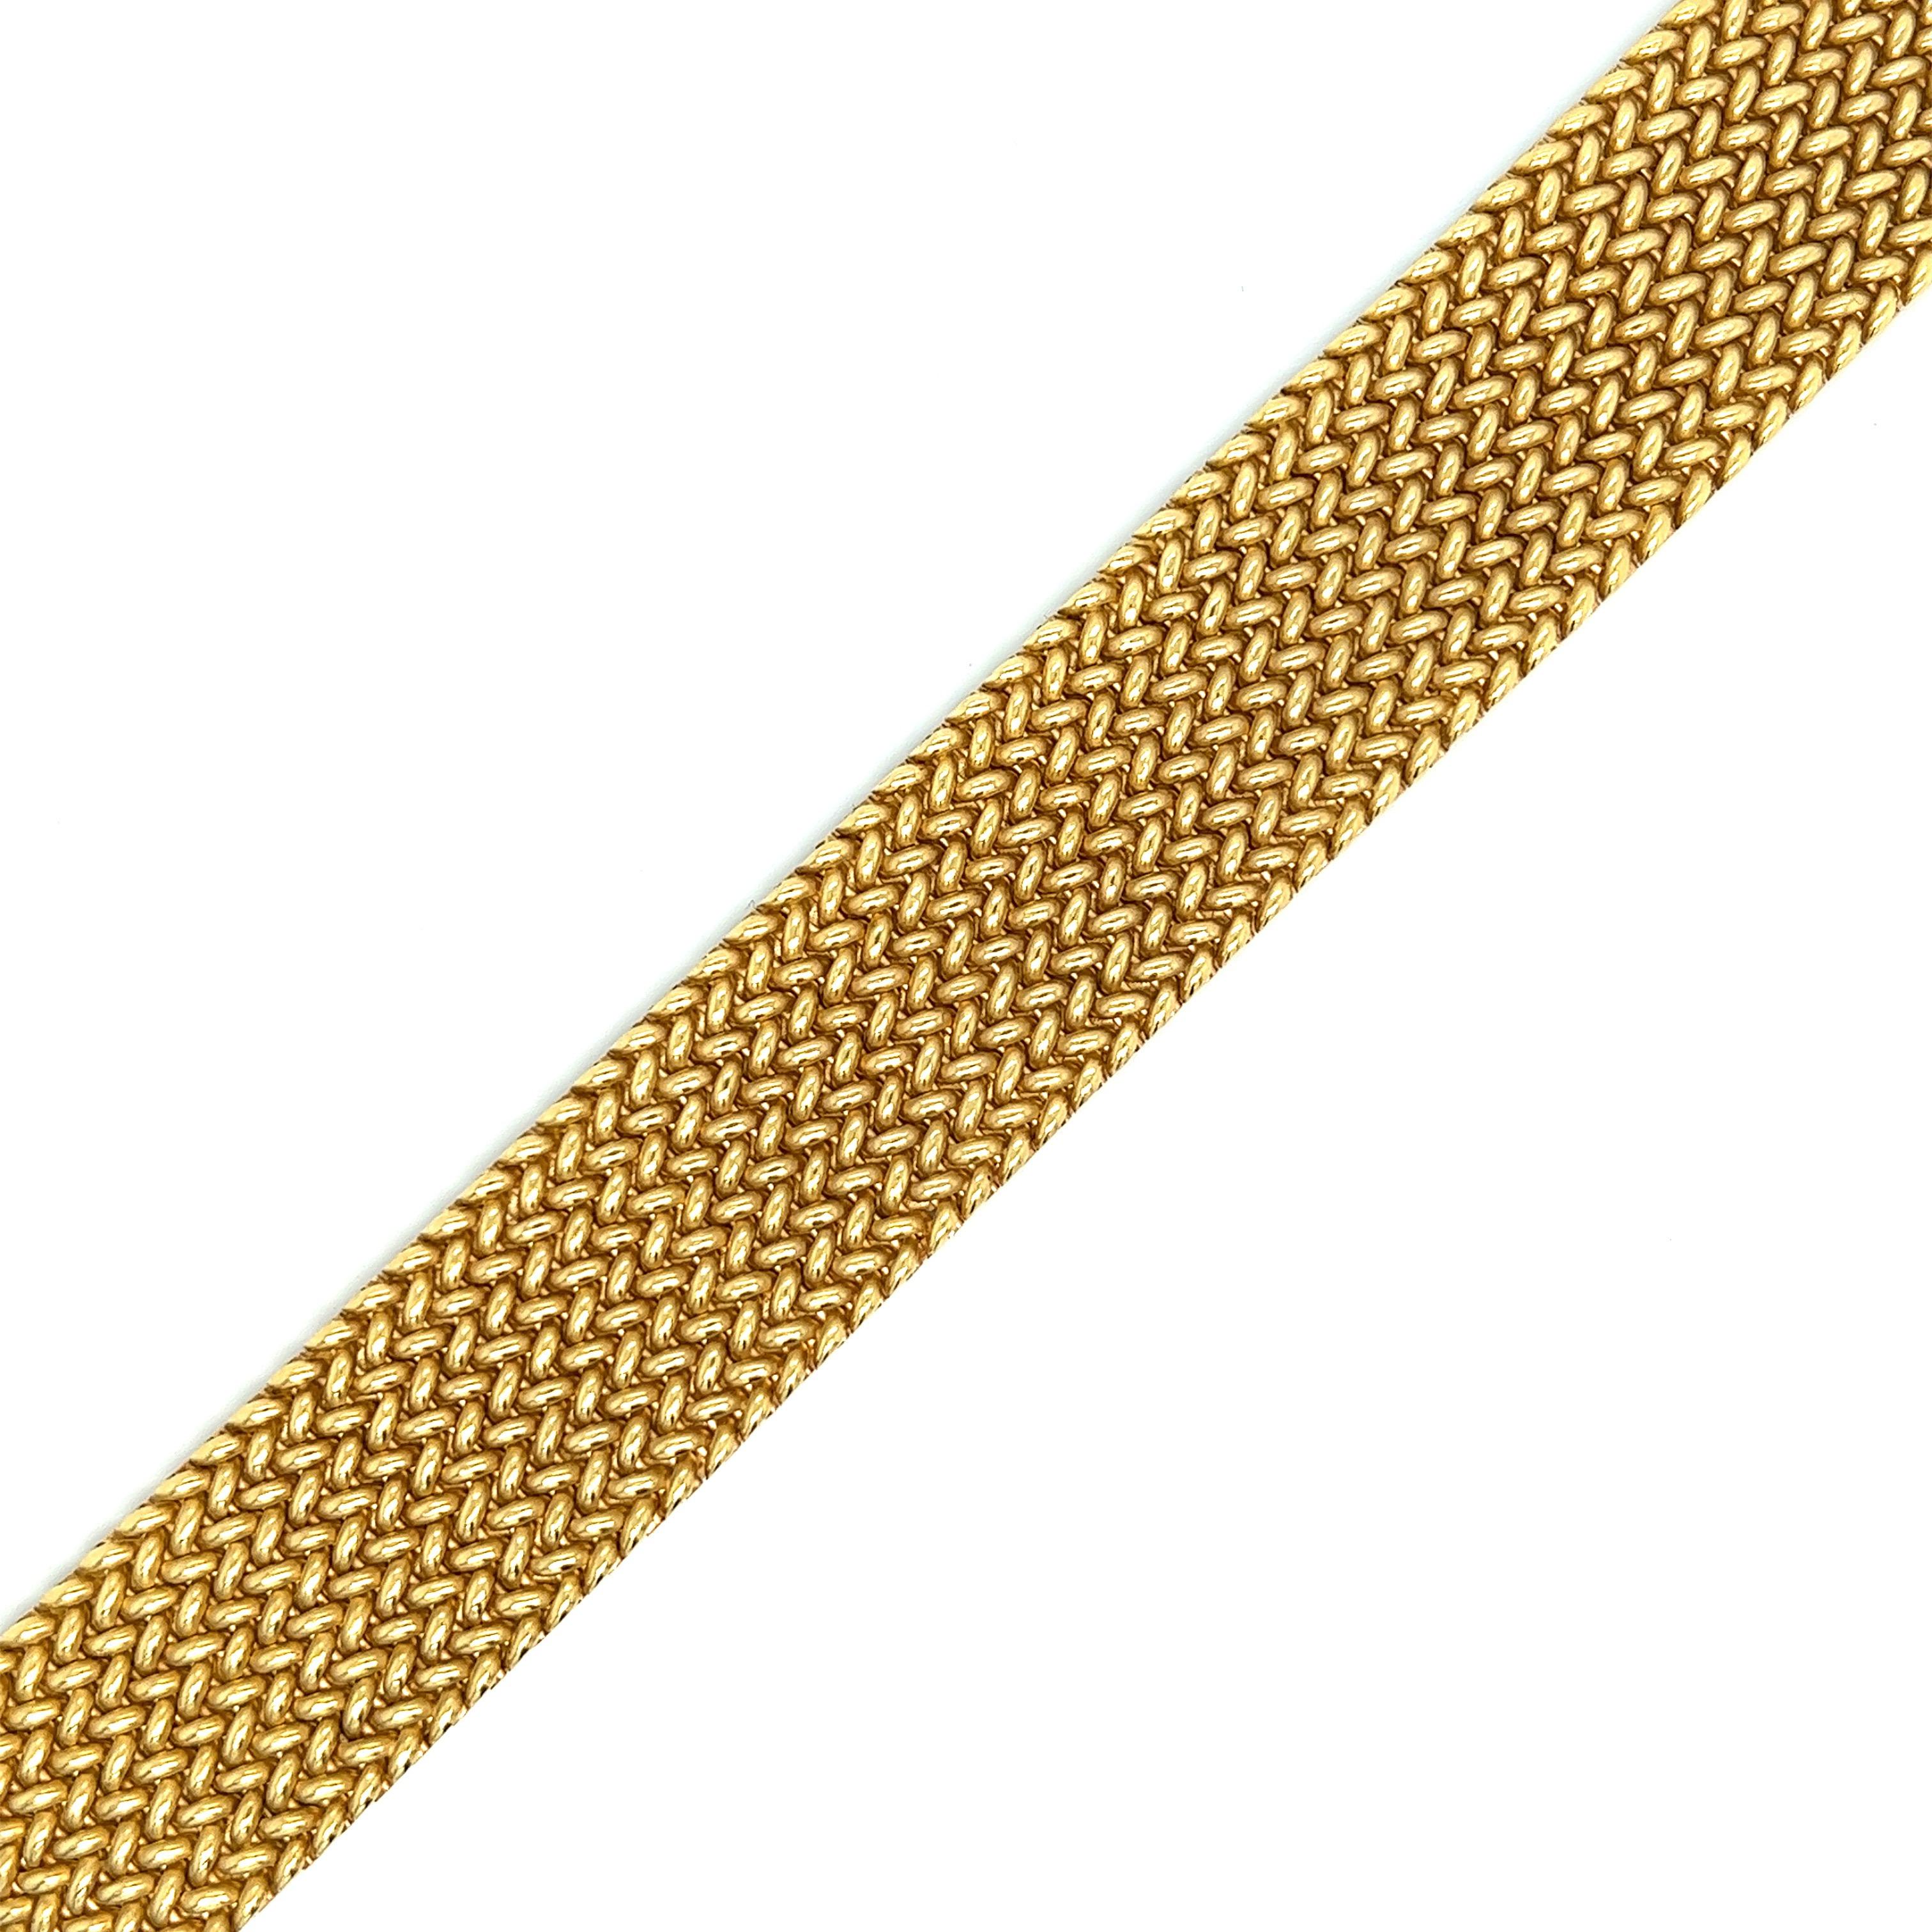 French gold strap bracelet

Strap of textured and polished links, 18 karat yellow gold; marked 750

Size: width 0.75 inch, length 7.38 inches
Total weight: 72.2 grams